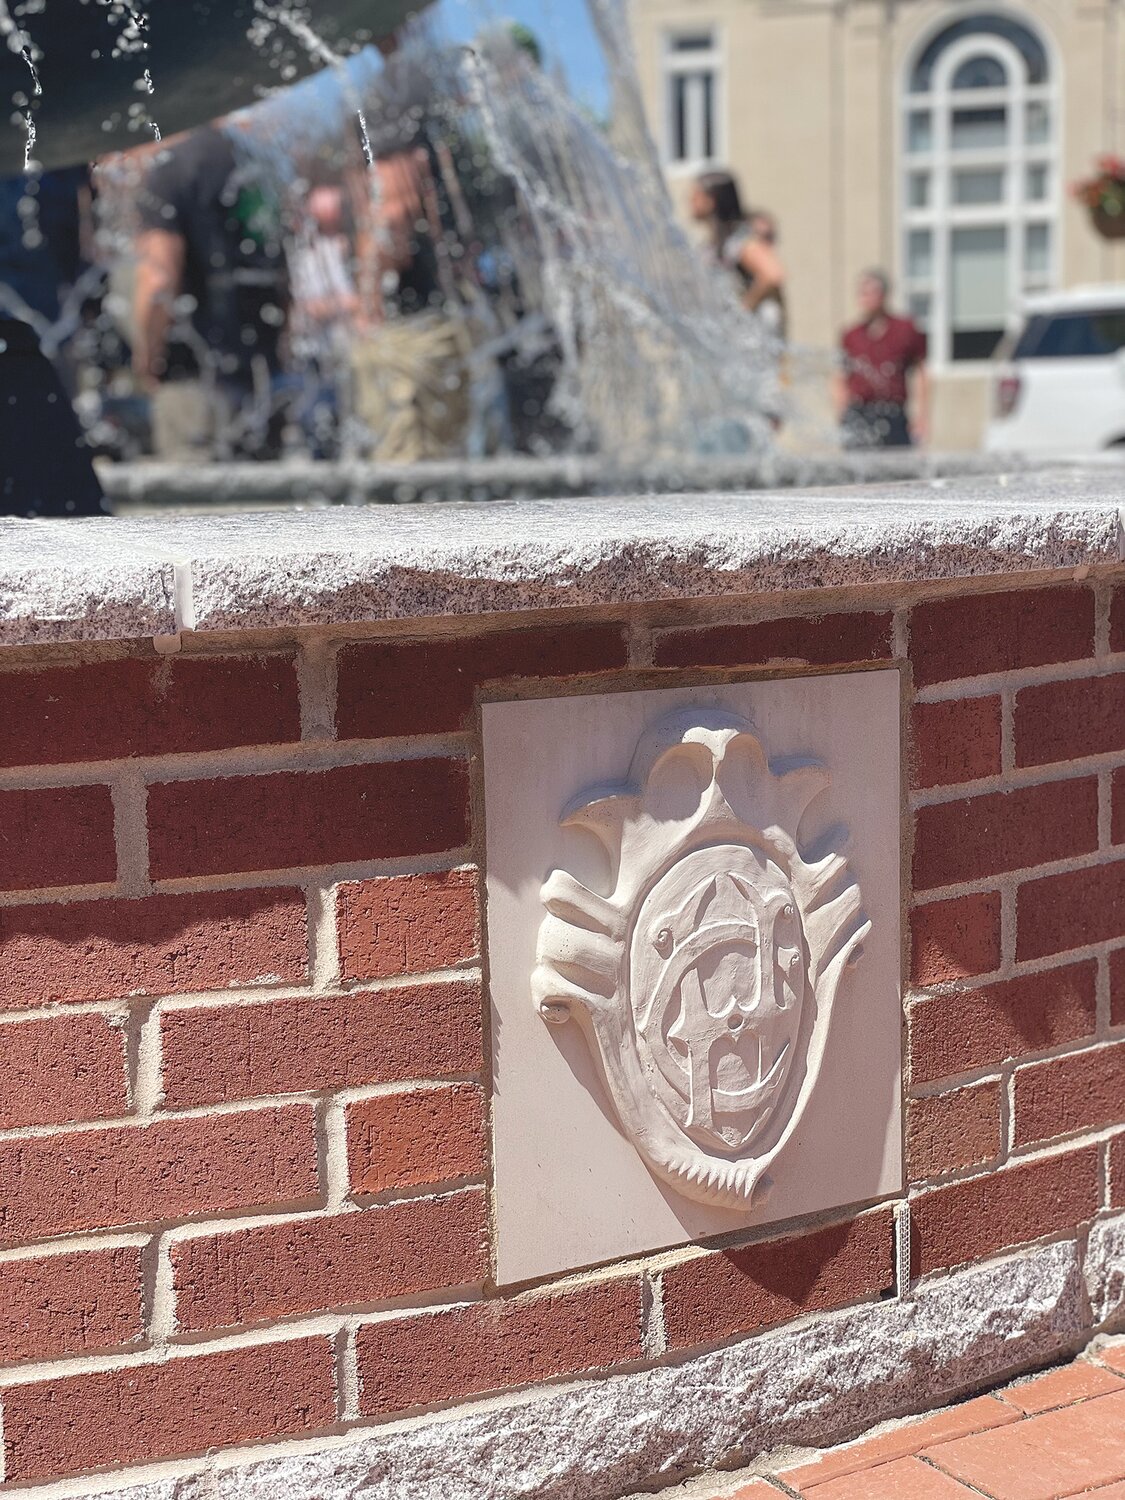 The Crawford Hotel emblem has been incorporated into the design of the new fountain.